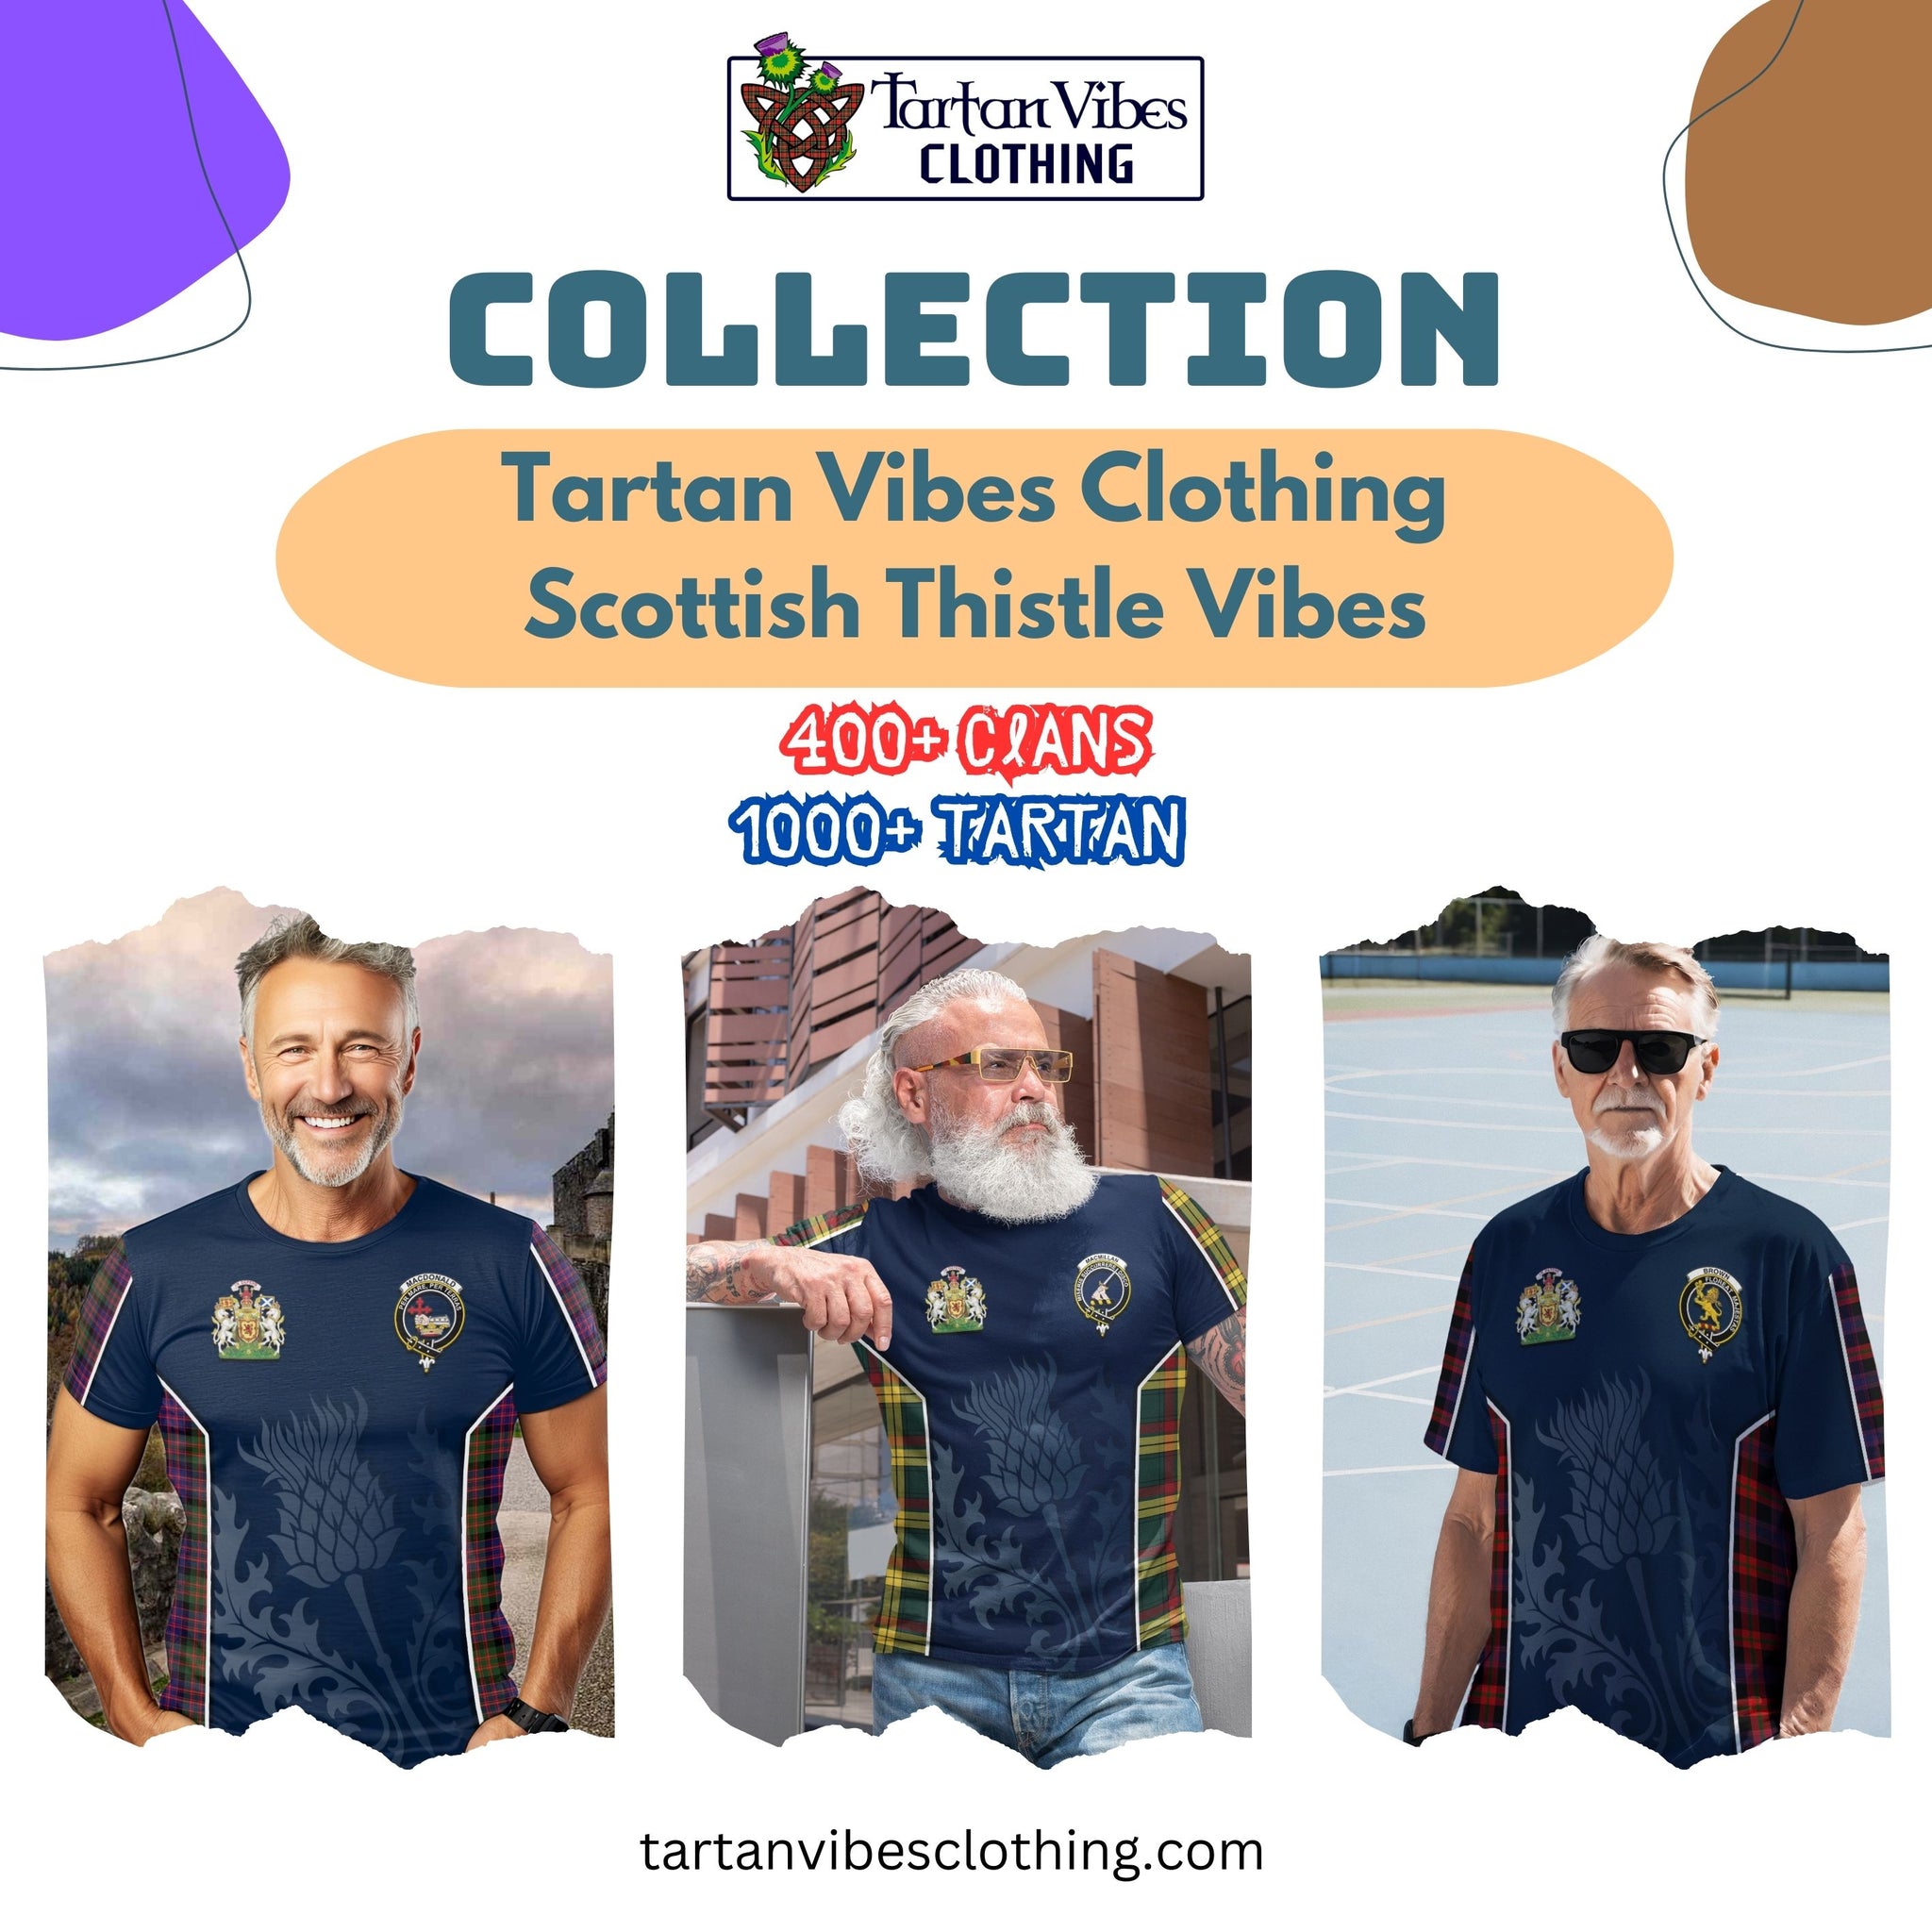 Tartan Vibes Clothing - Scottish Thistle Vibes Collection